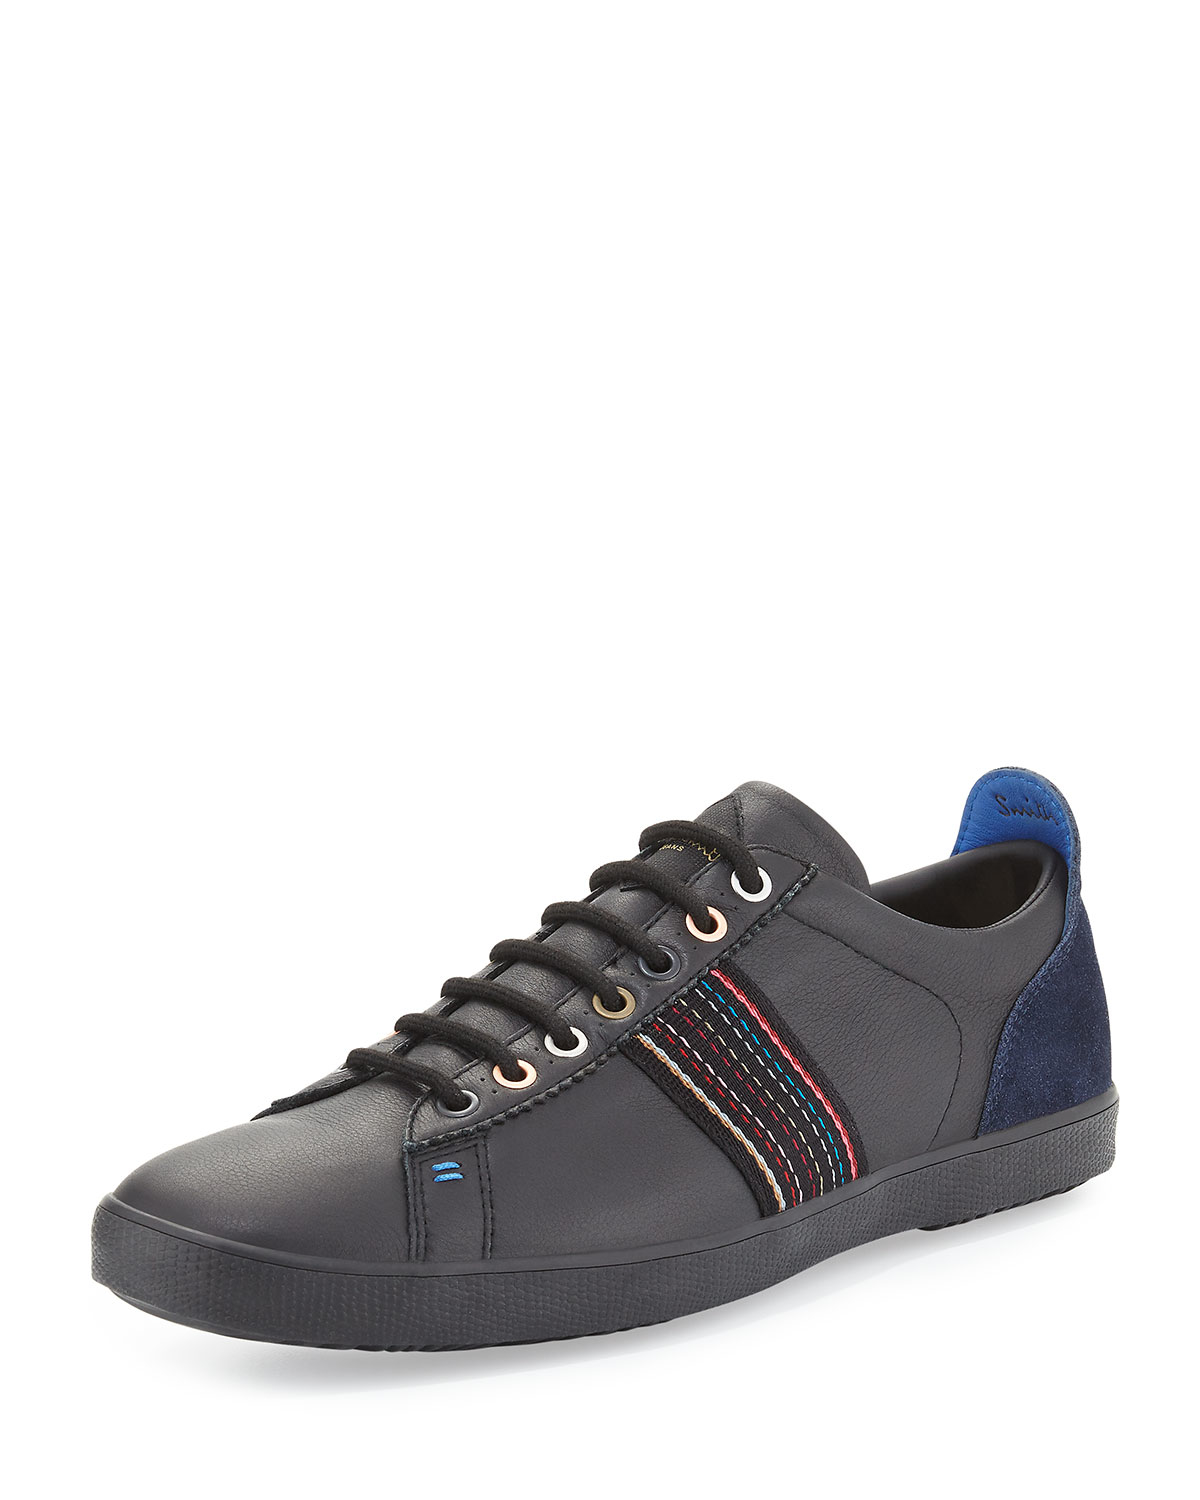 Paul Smith Osmo Leather Sneaker in Blue for Men - Lyst